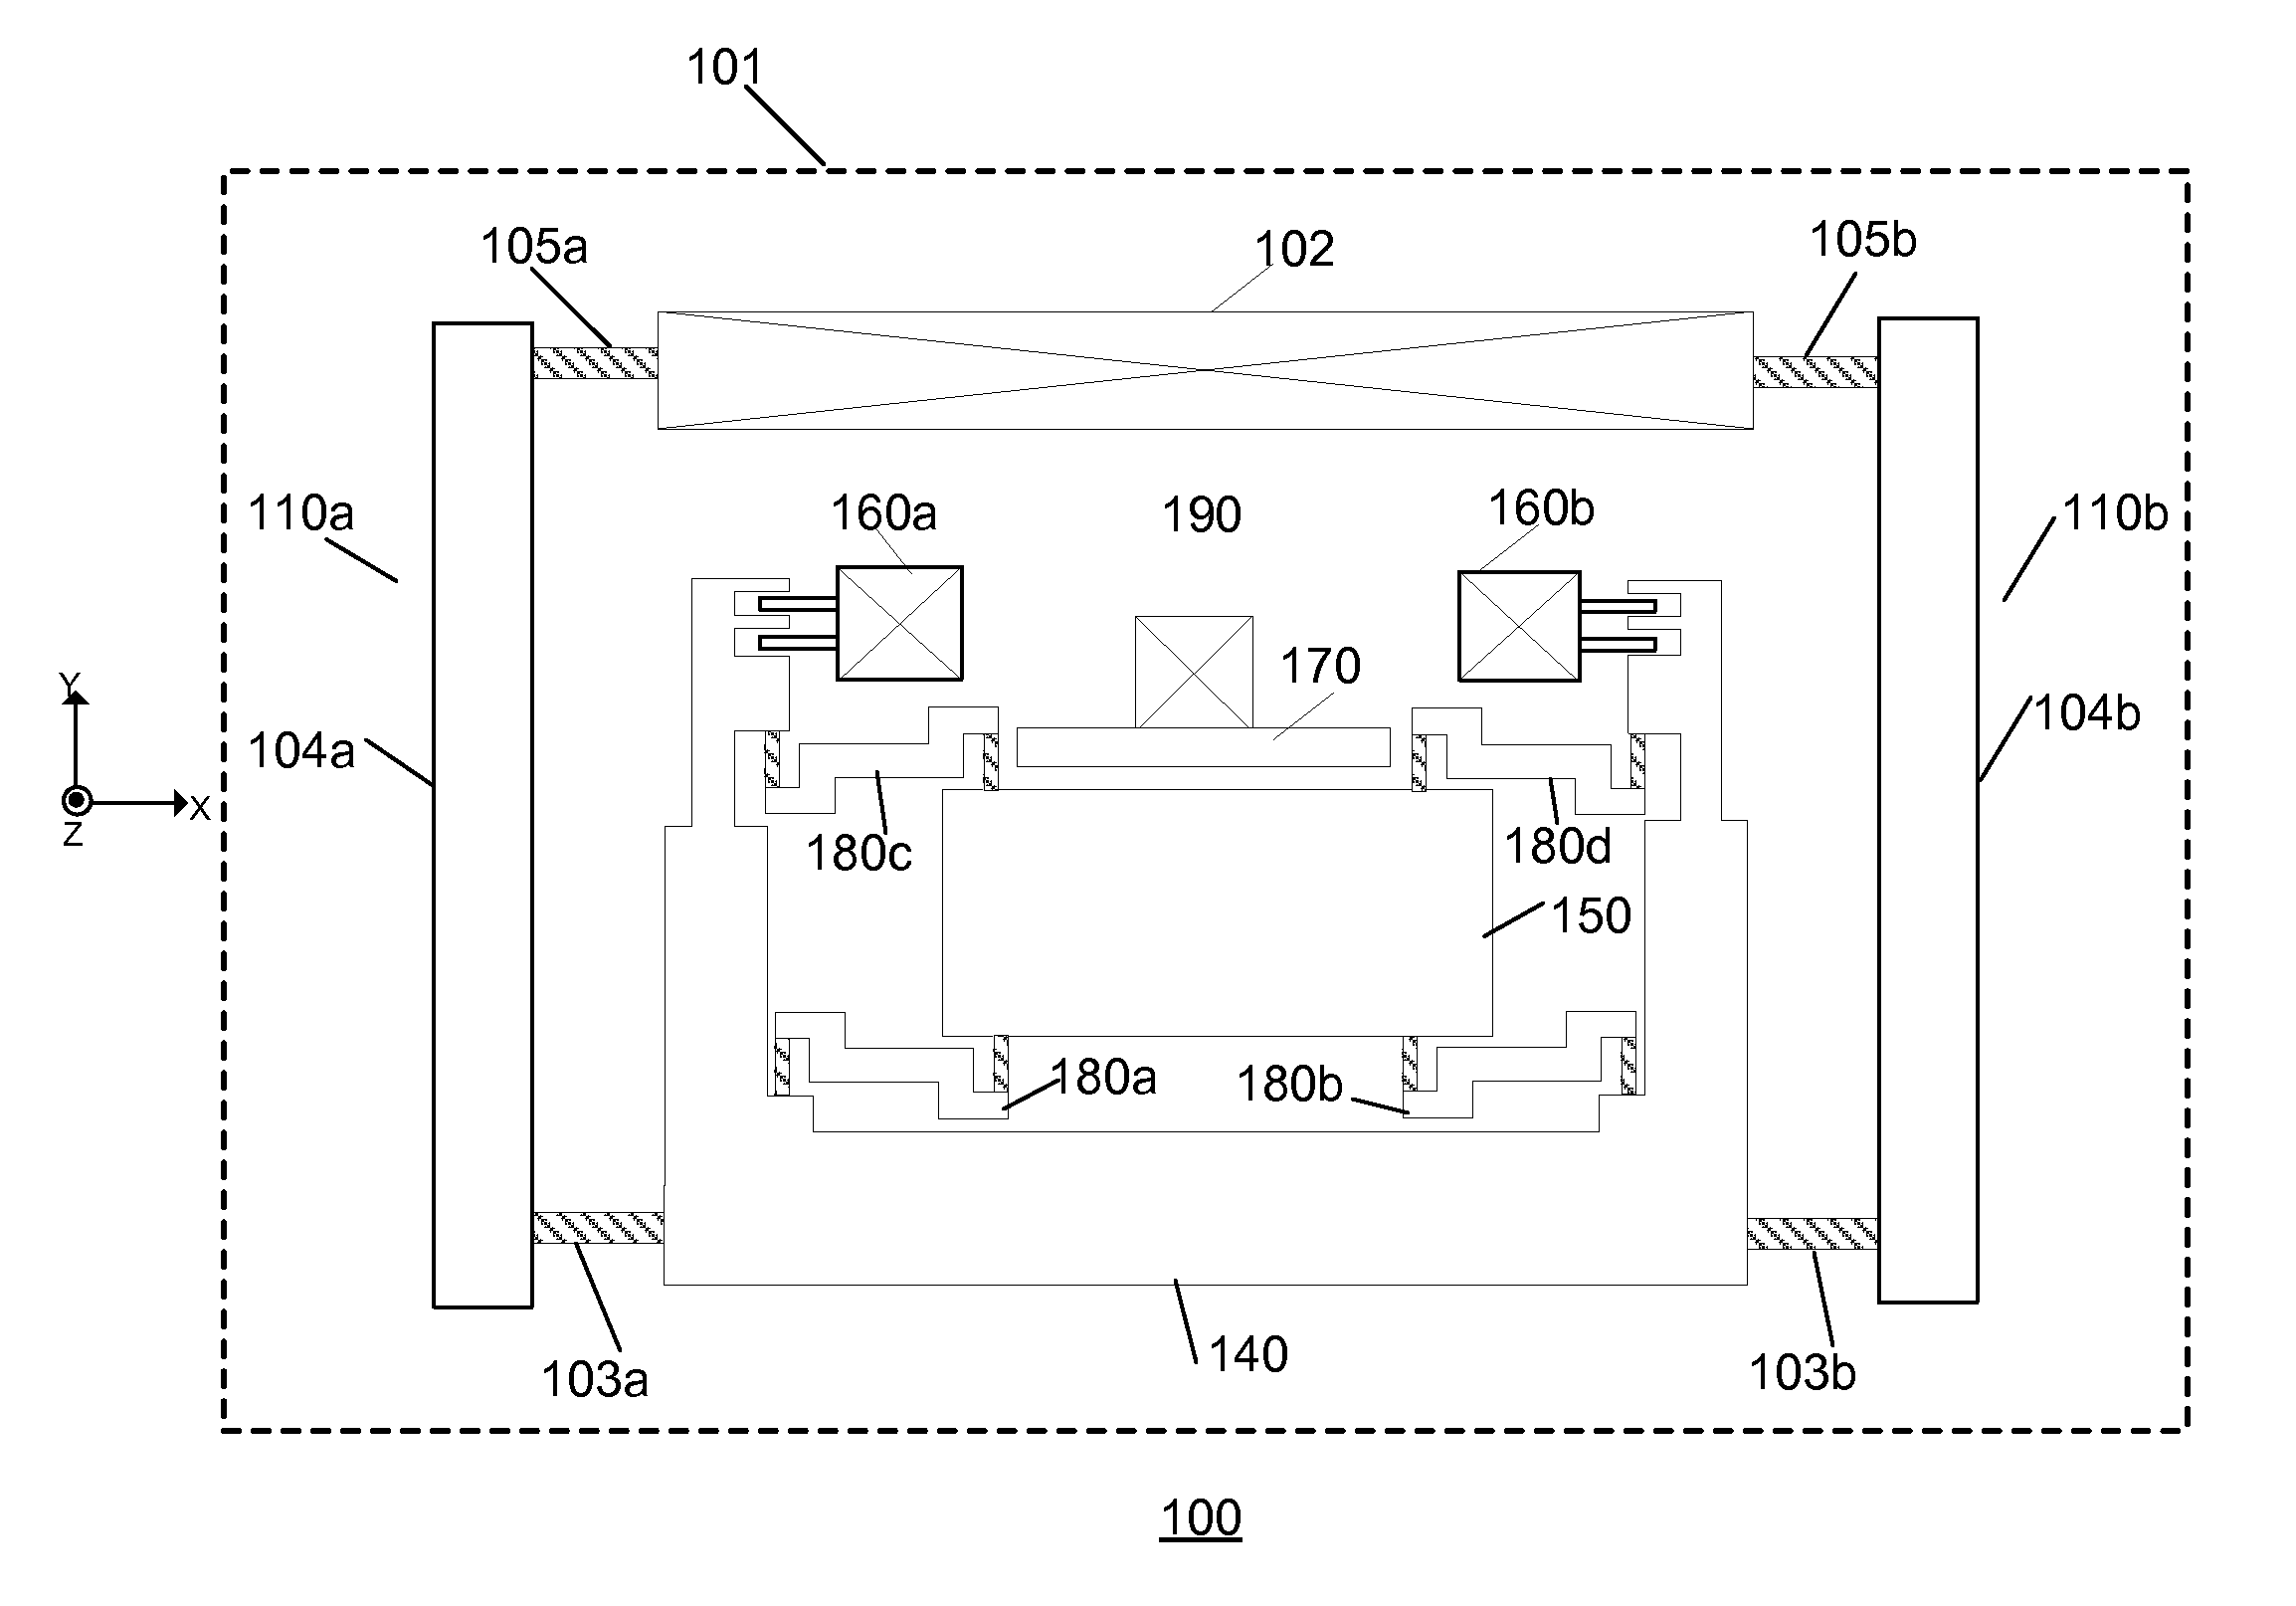 MEMS device with improved spring system